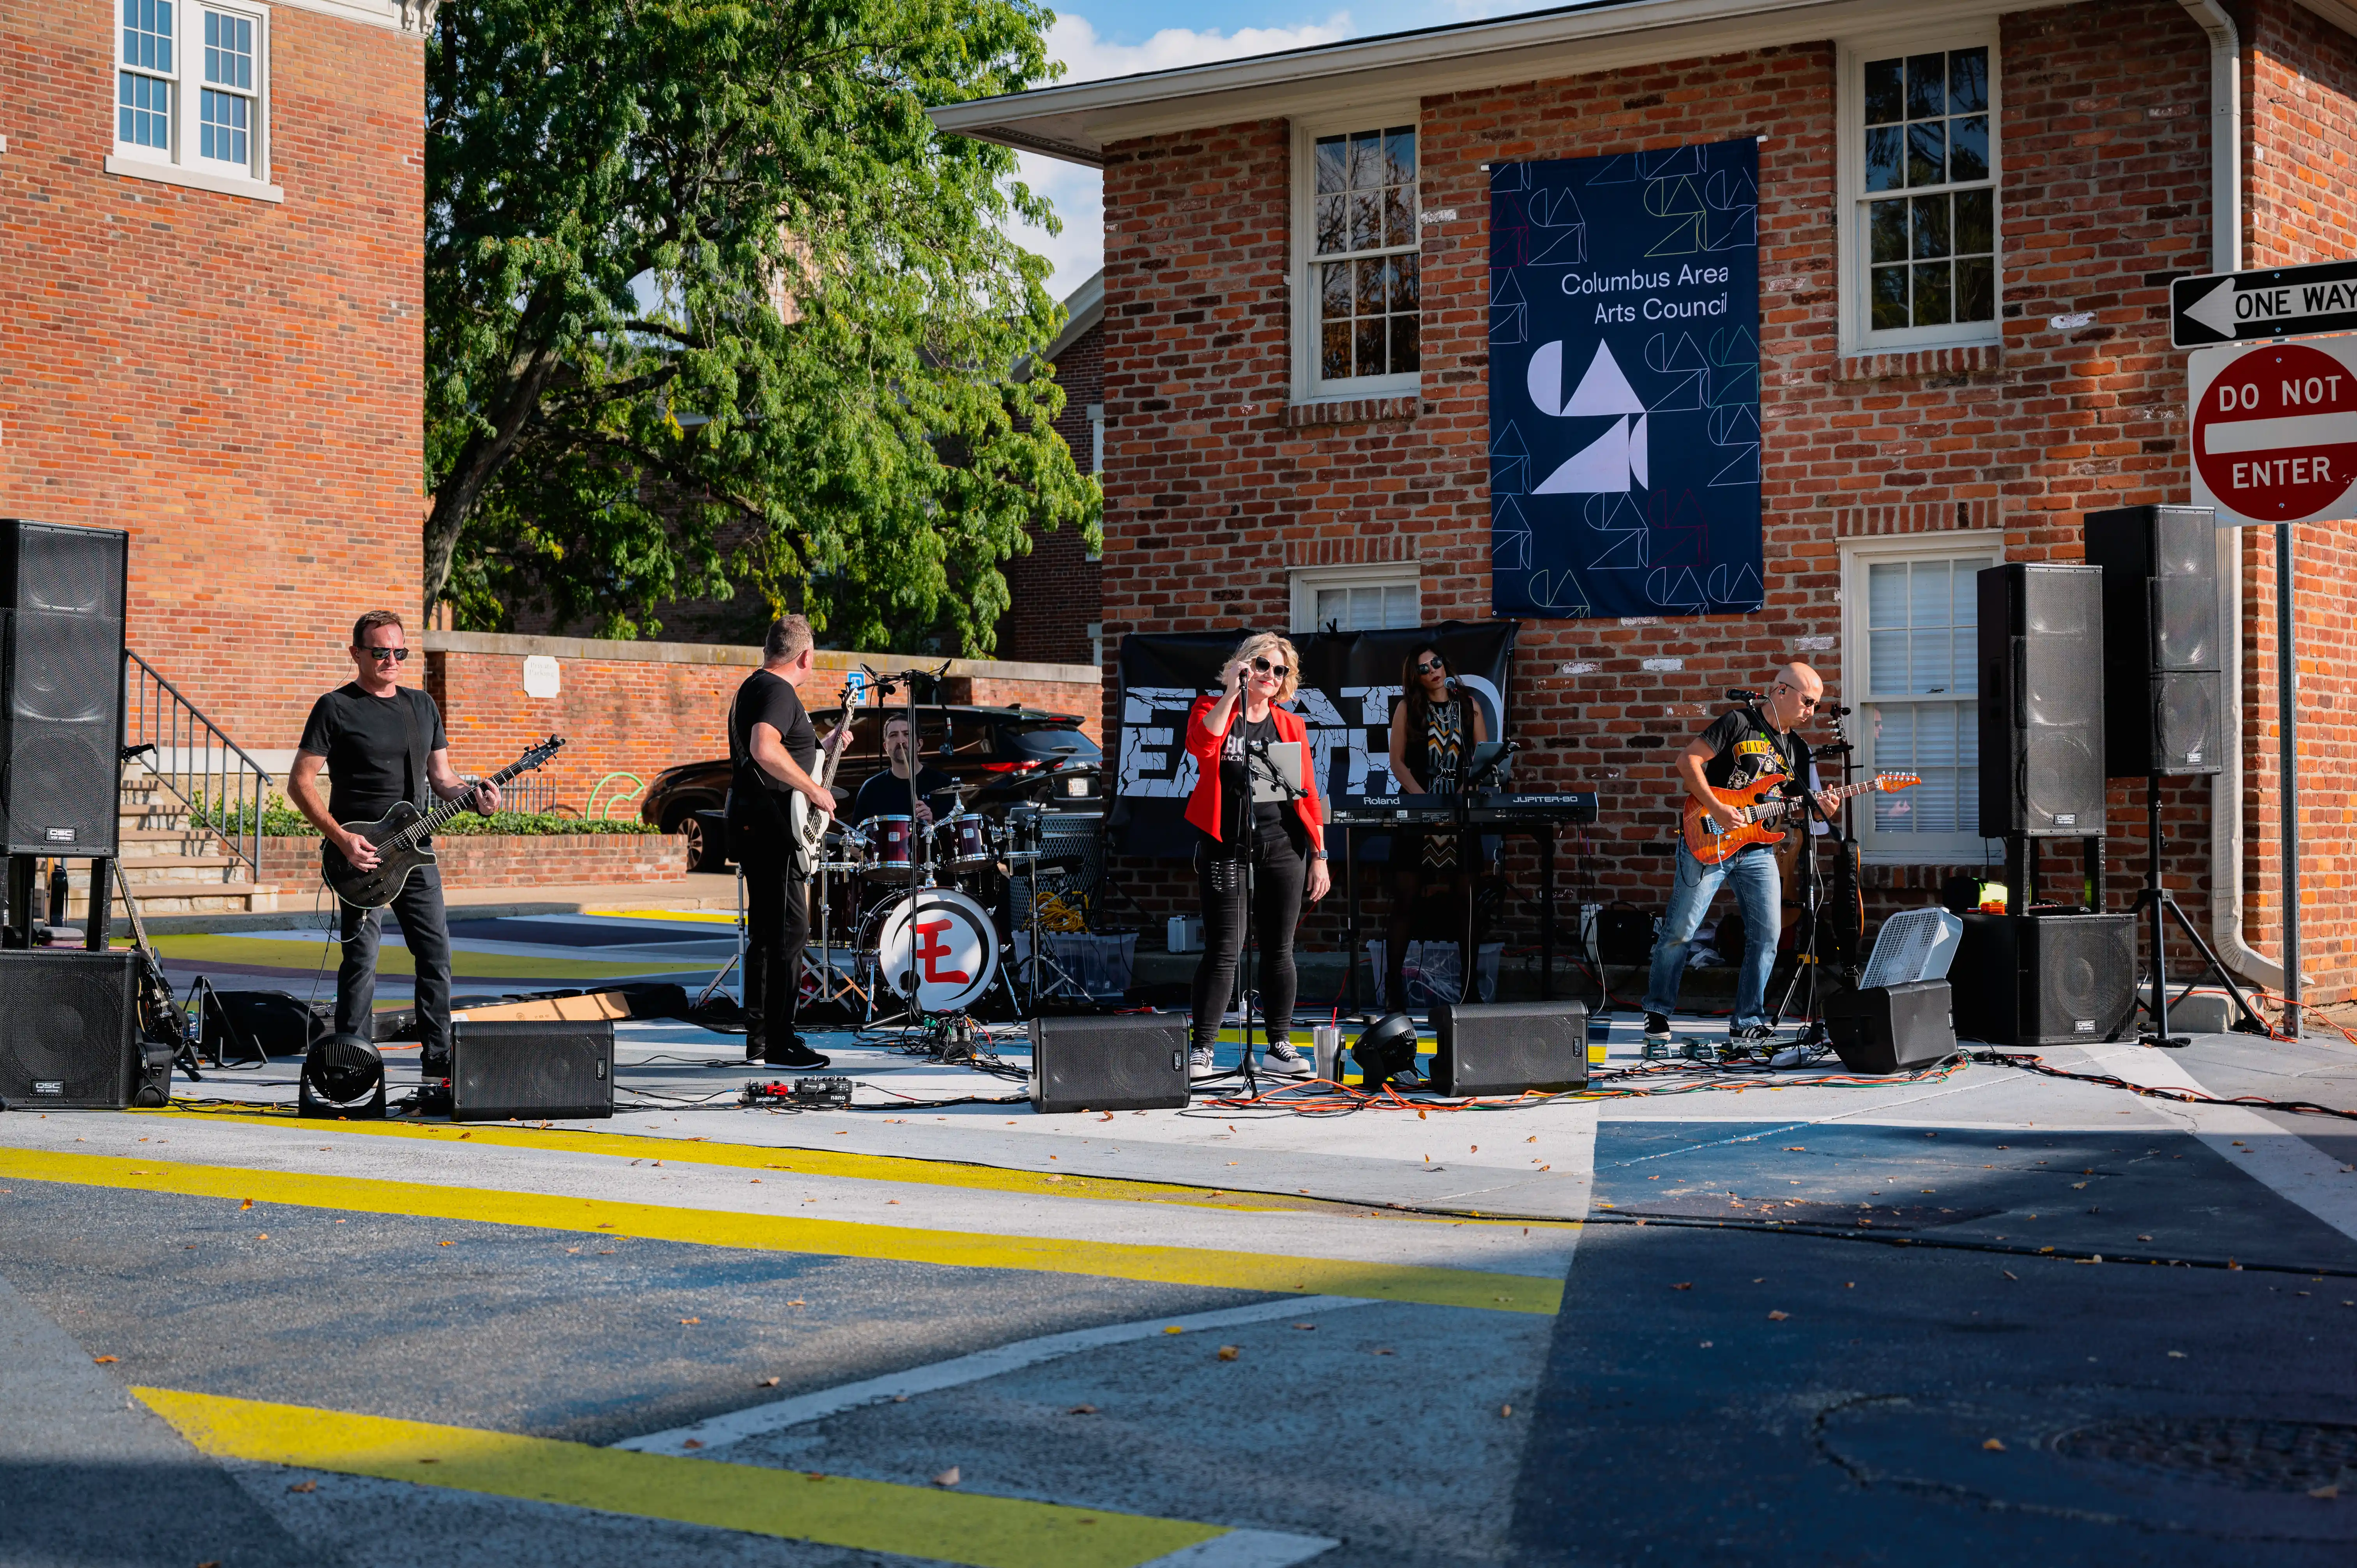 A live band performing outdoors with a singer, guitarists, a drummer, and keyboard player in front of a Columbus Area Arts Council sign.